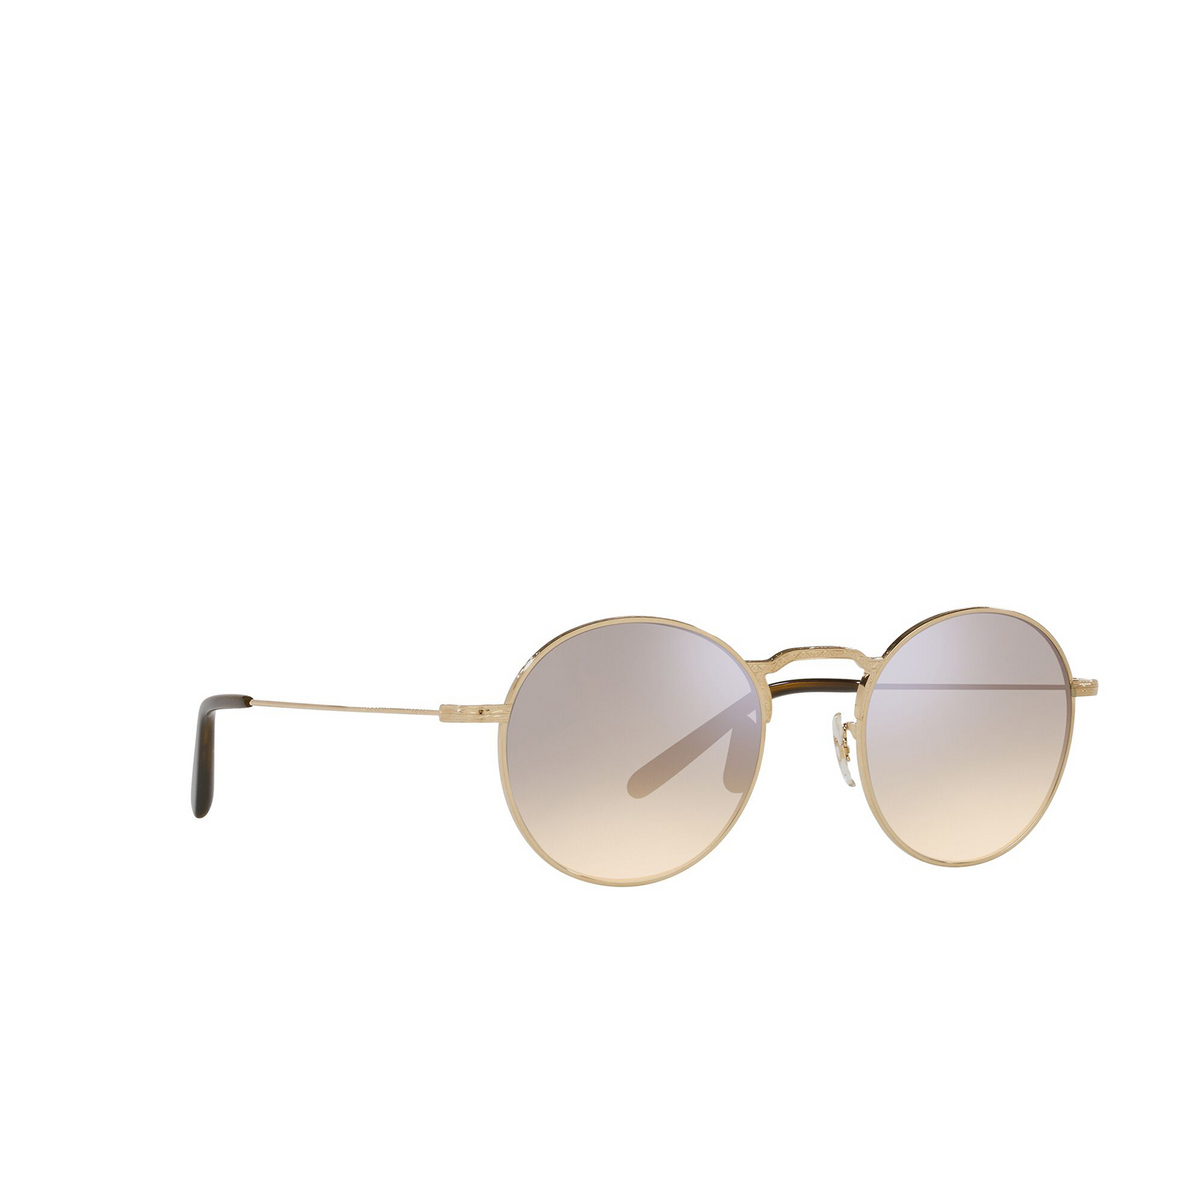 Oliver Peoples® Round Sunglasses: Weslie Sun OV1282ST color Gold 529232 - three-quarters view.